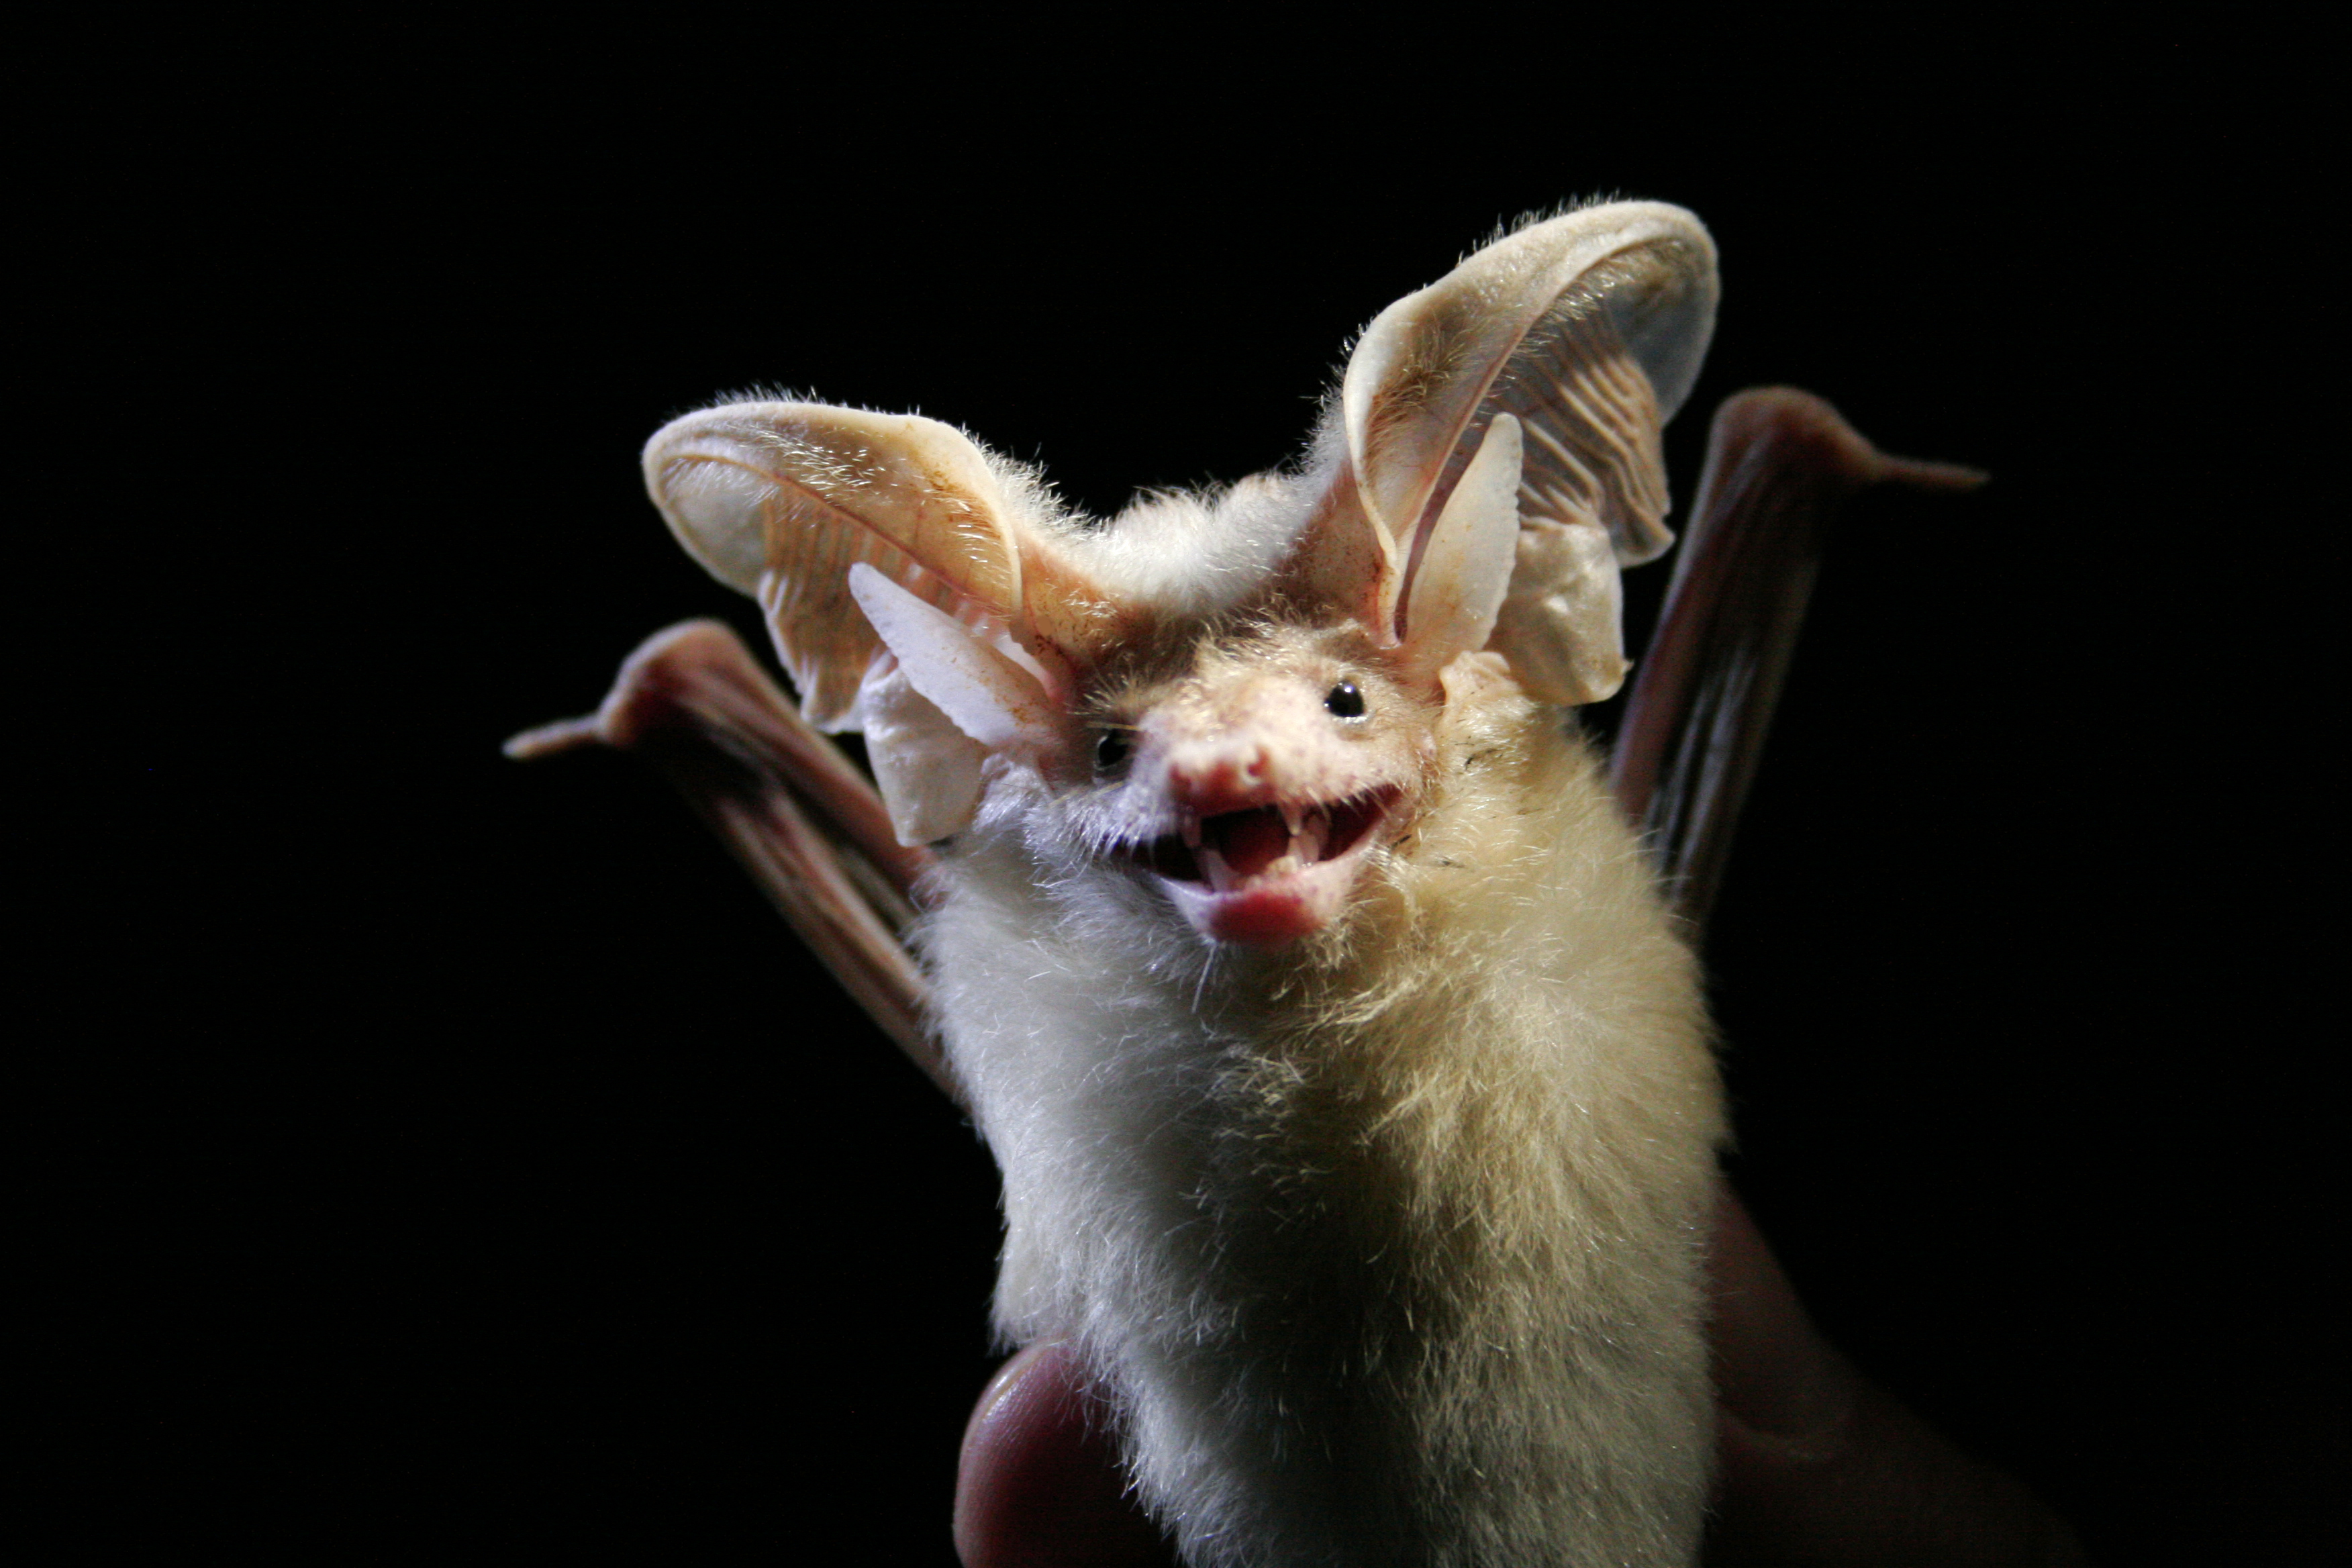 The desert long-eared bat (Otonycteris hemprichii) is found in North Africa and the Middle East.